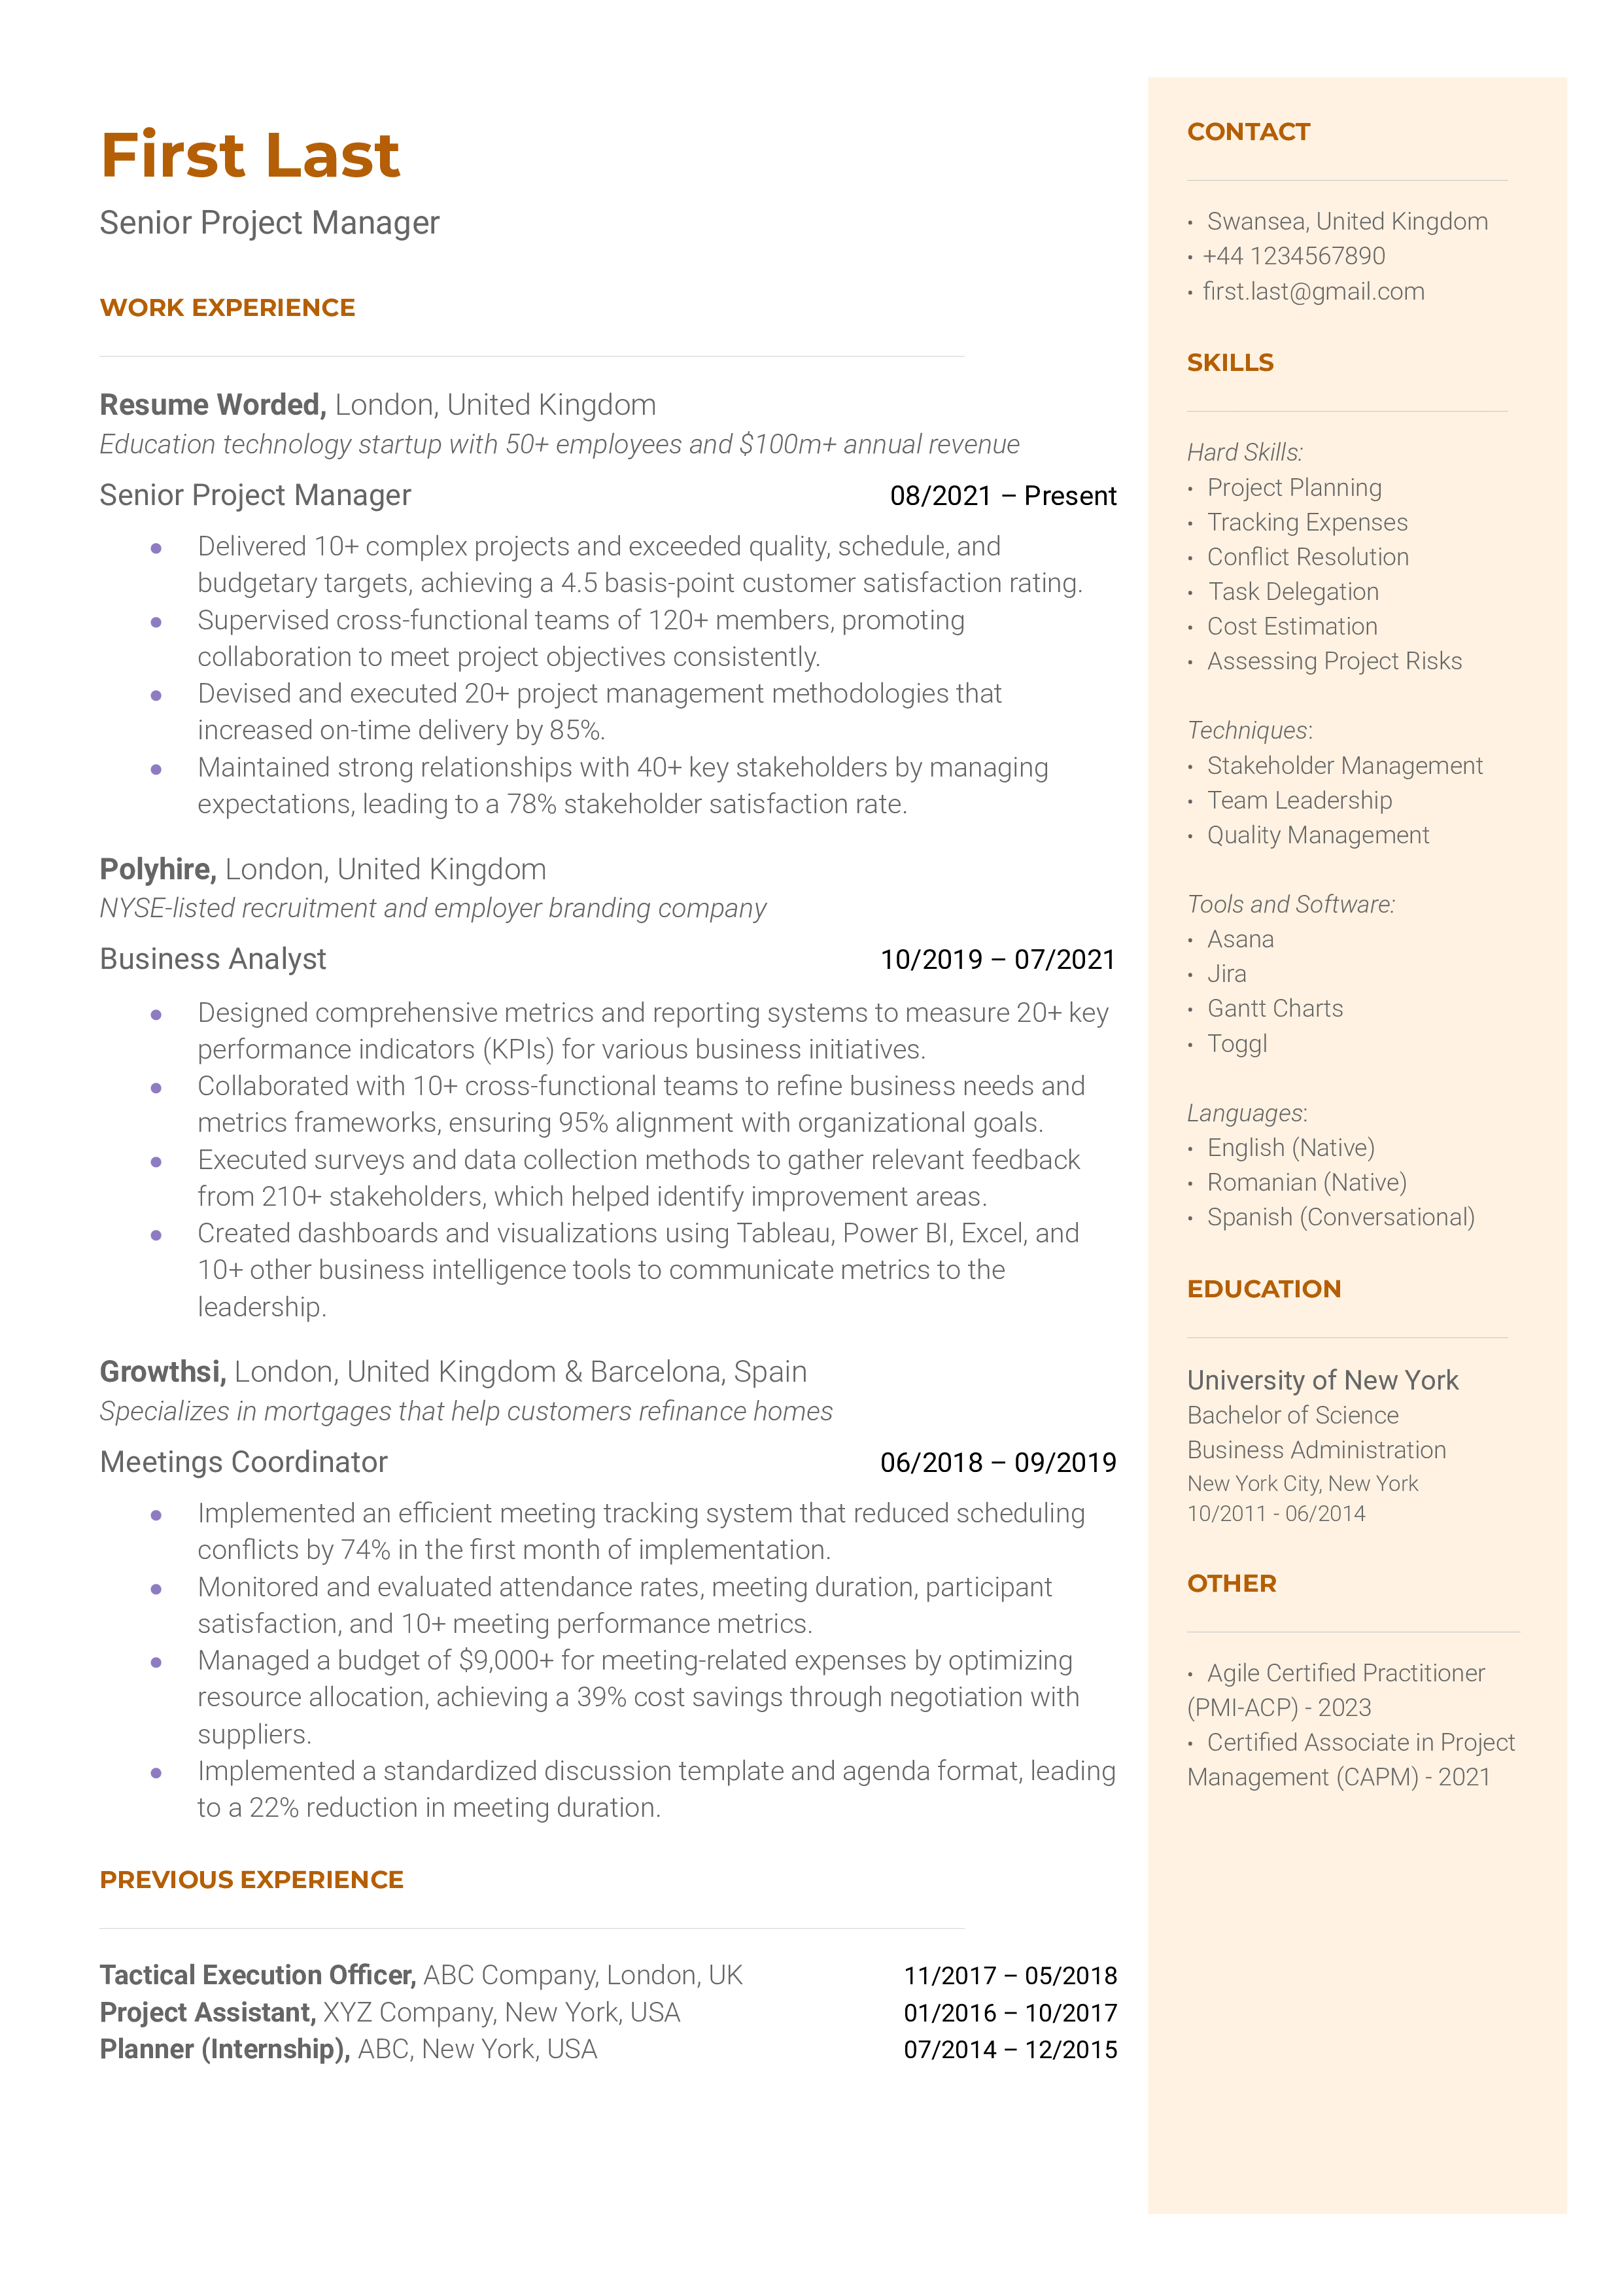 A CV screenshot showcasing leadership experience and project management skills for a Senior Project Manager role.